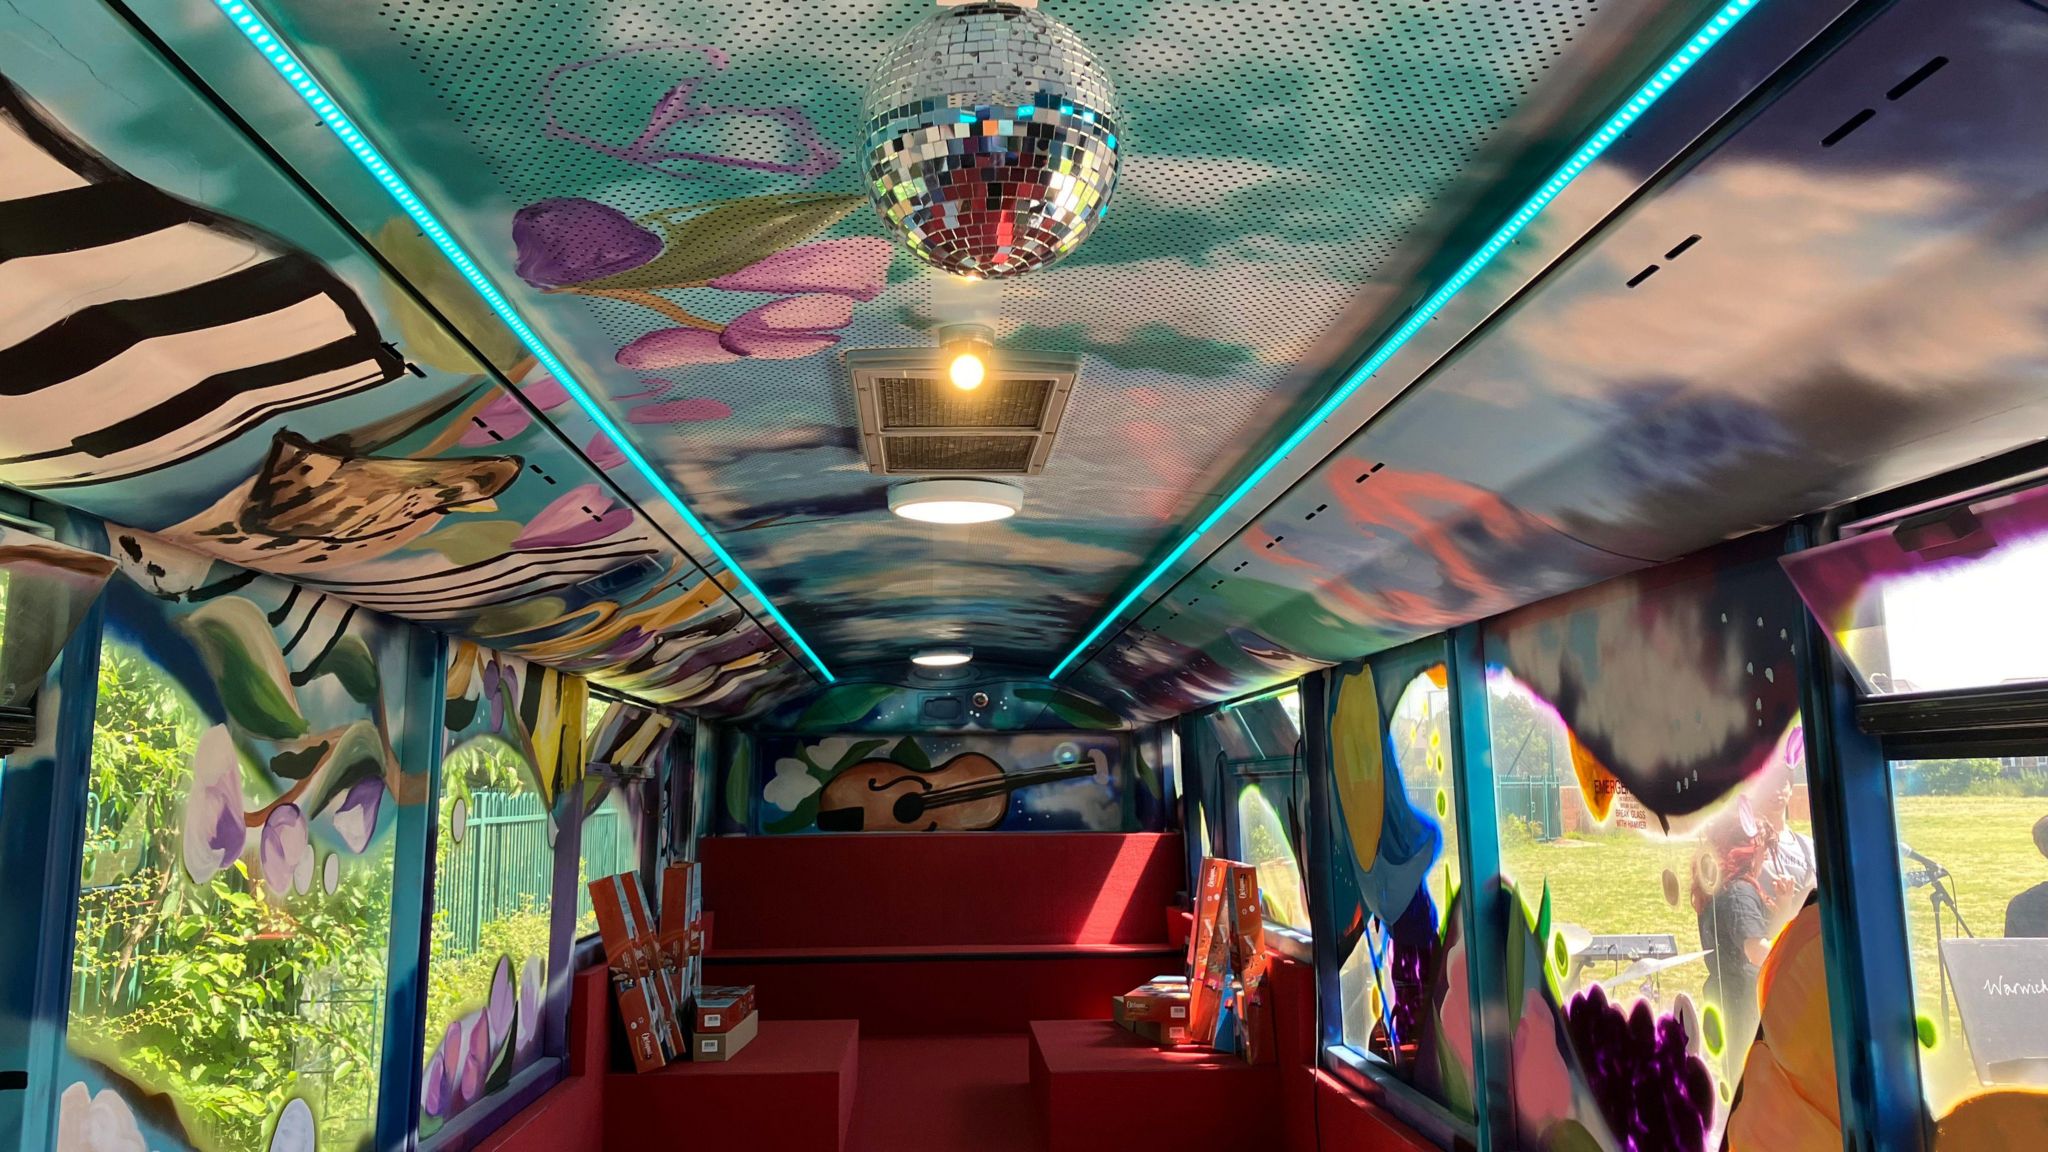 The inside of a bus that has been painted brightly, with sofas installed and a disco ball on the ceiling